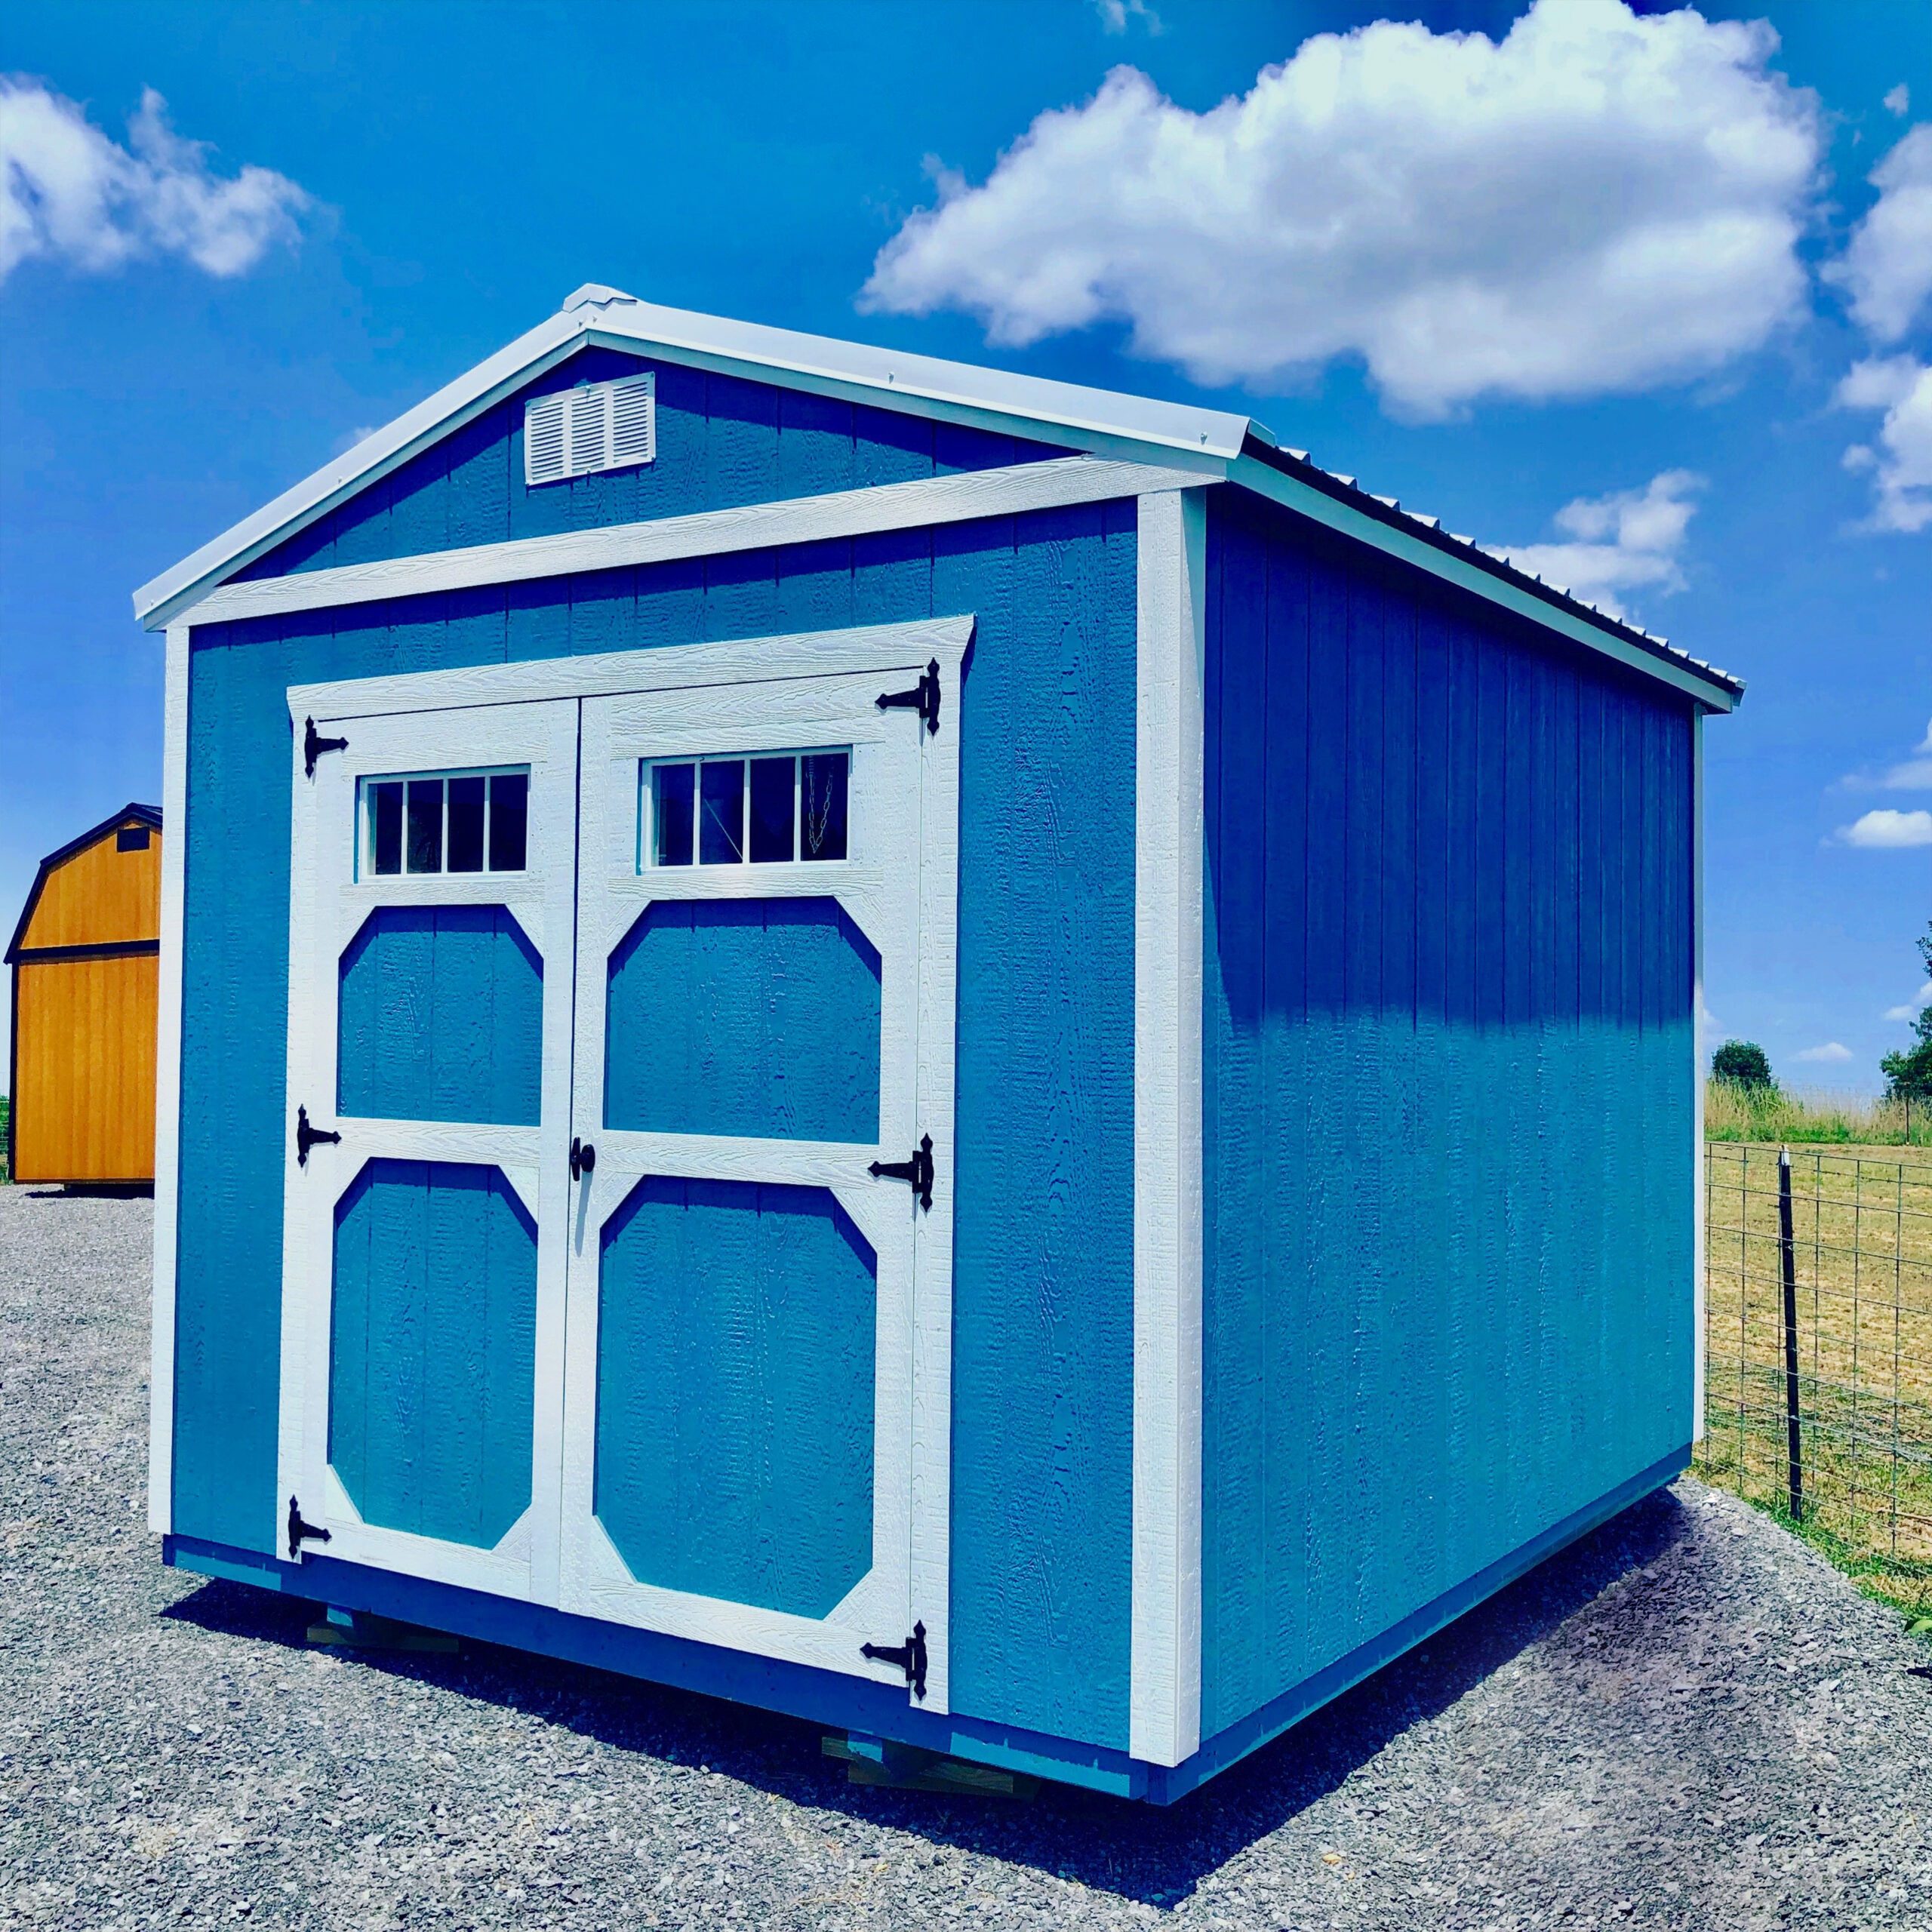 Blue utility shed with white trim